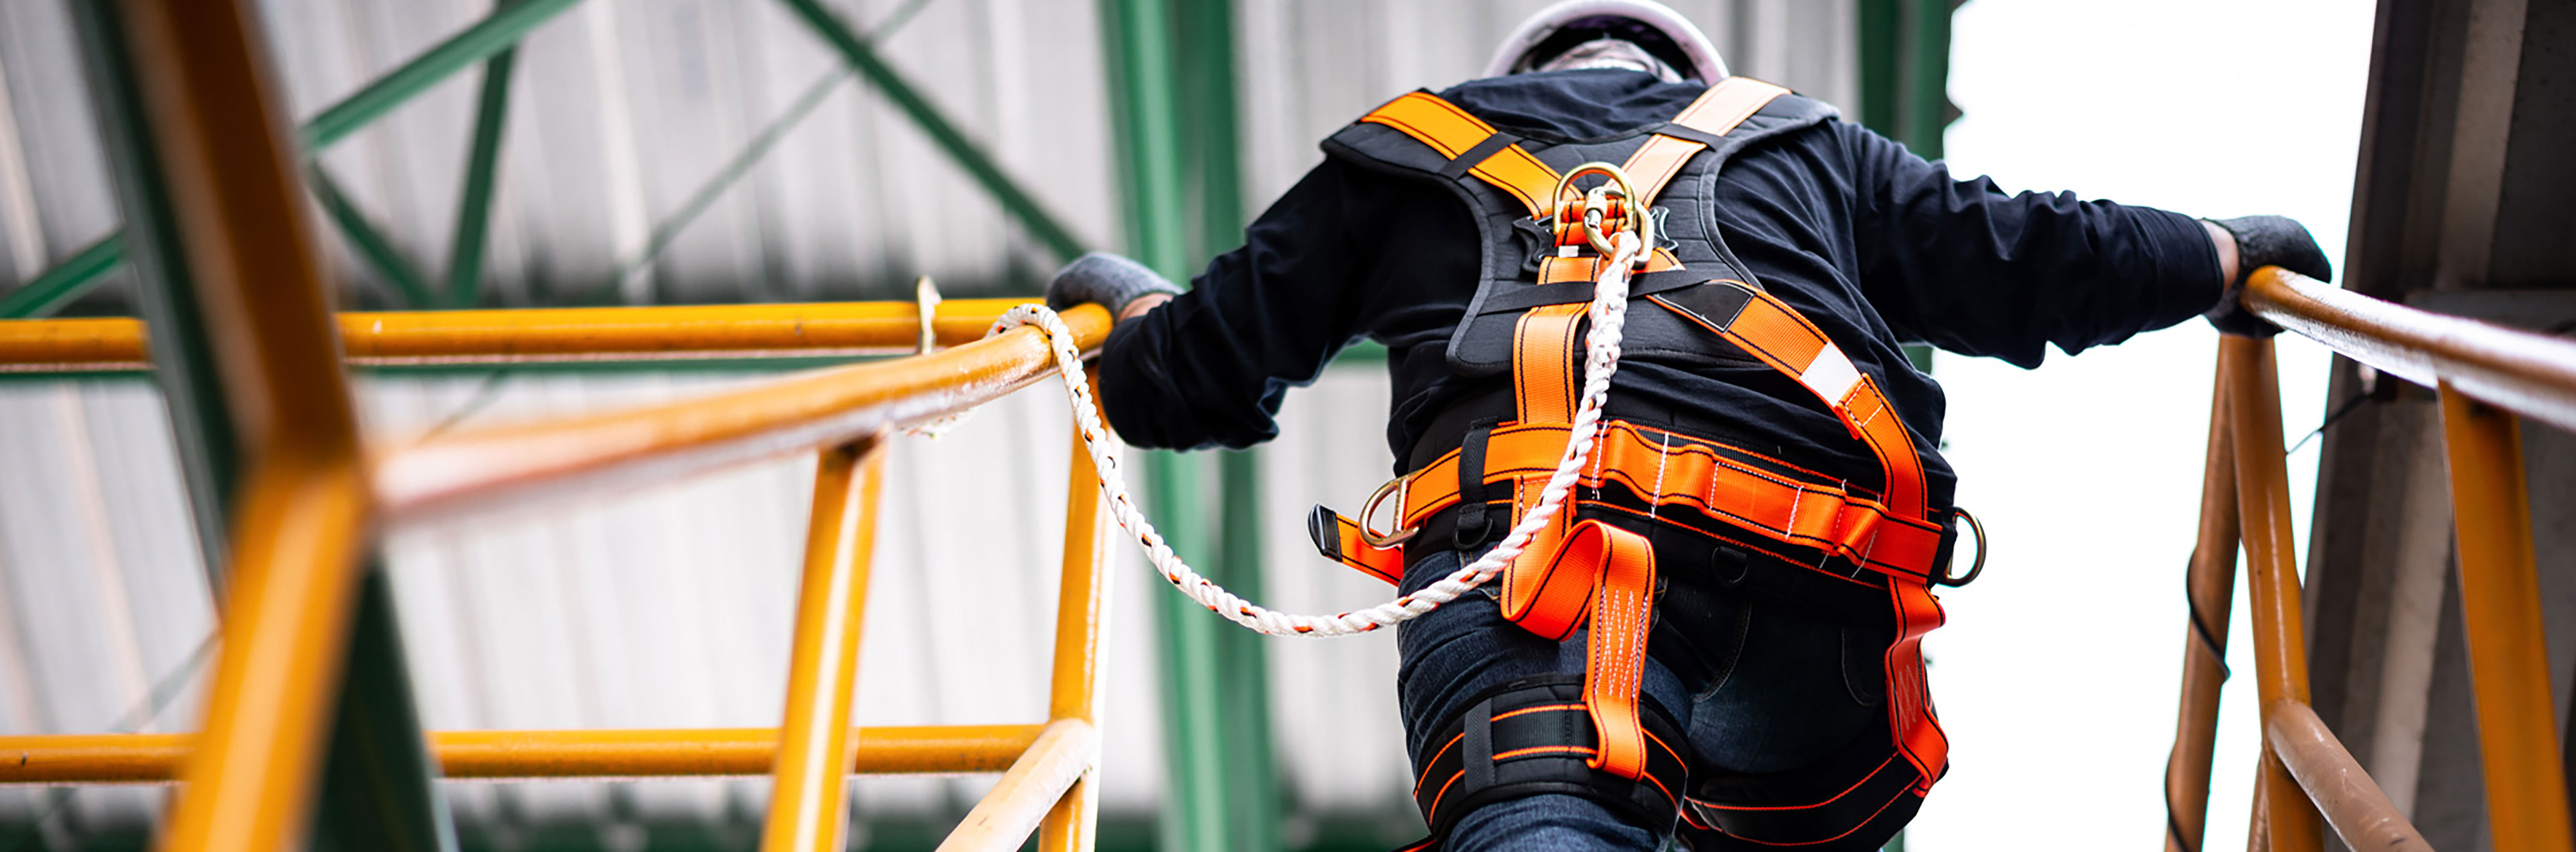 Ĵý construction worker wearing safety harness and safety line working at a high location